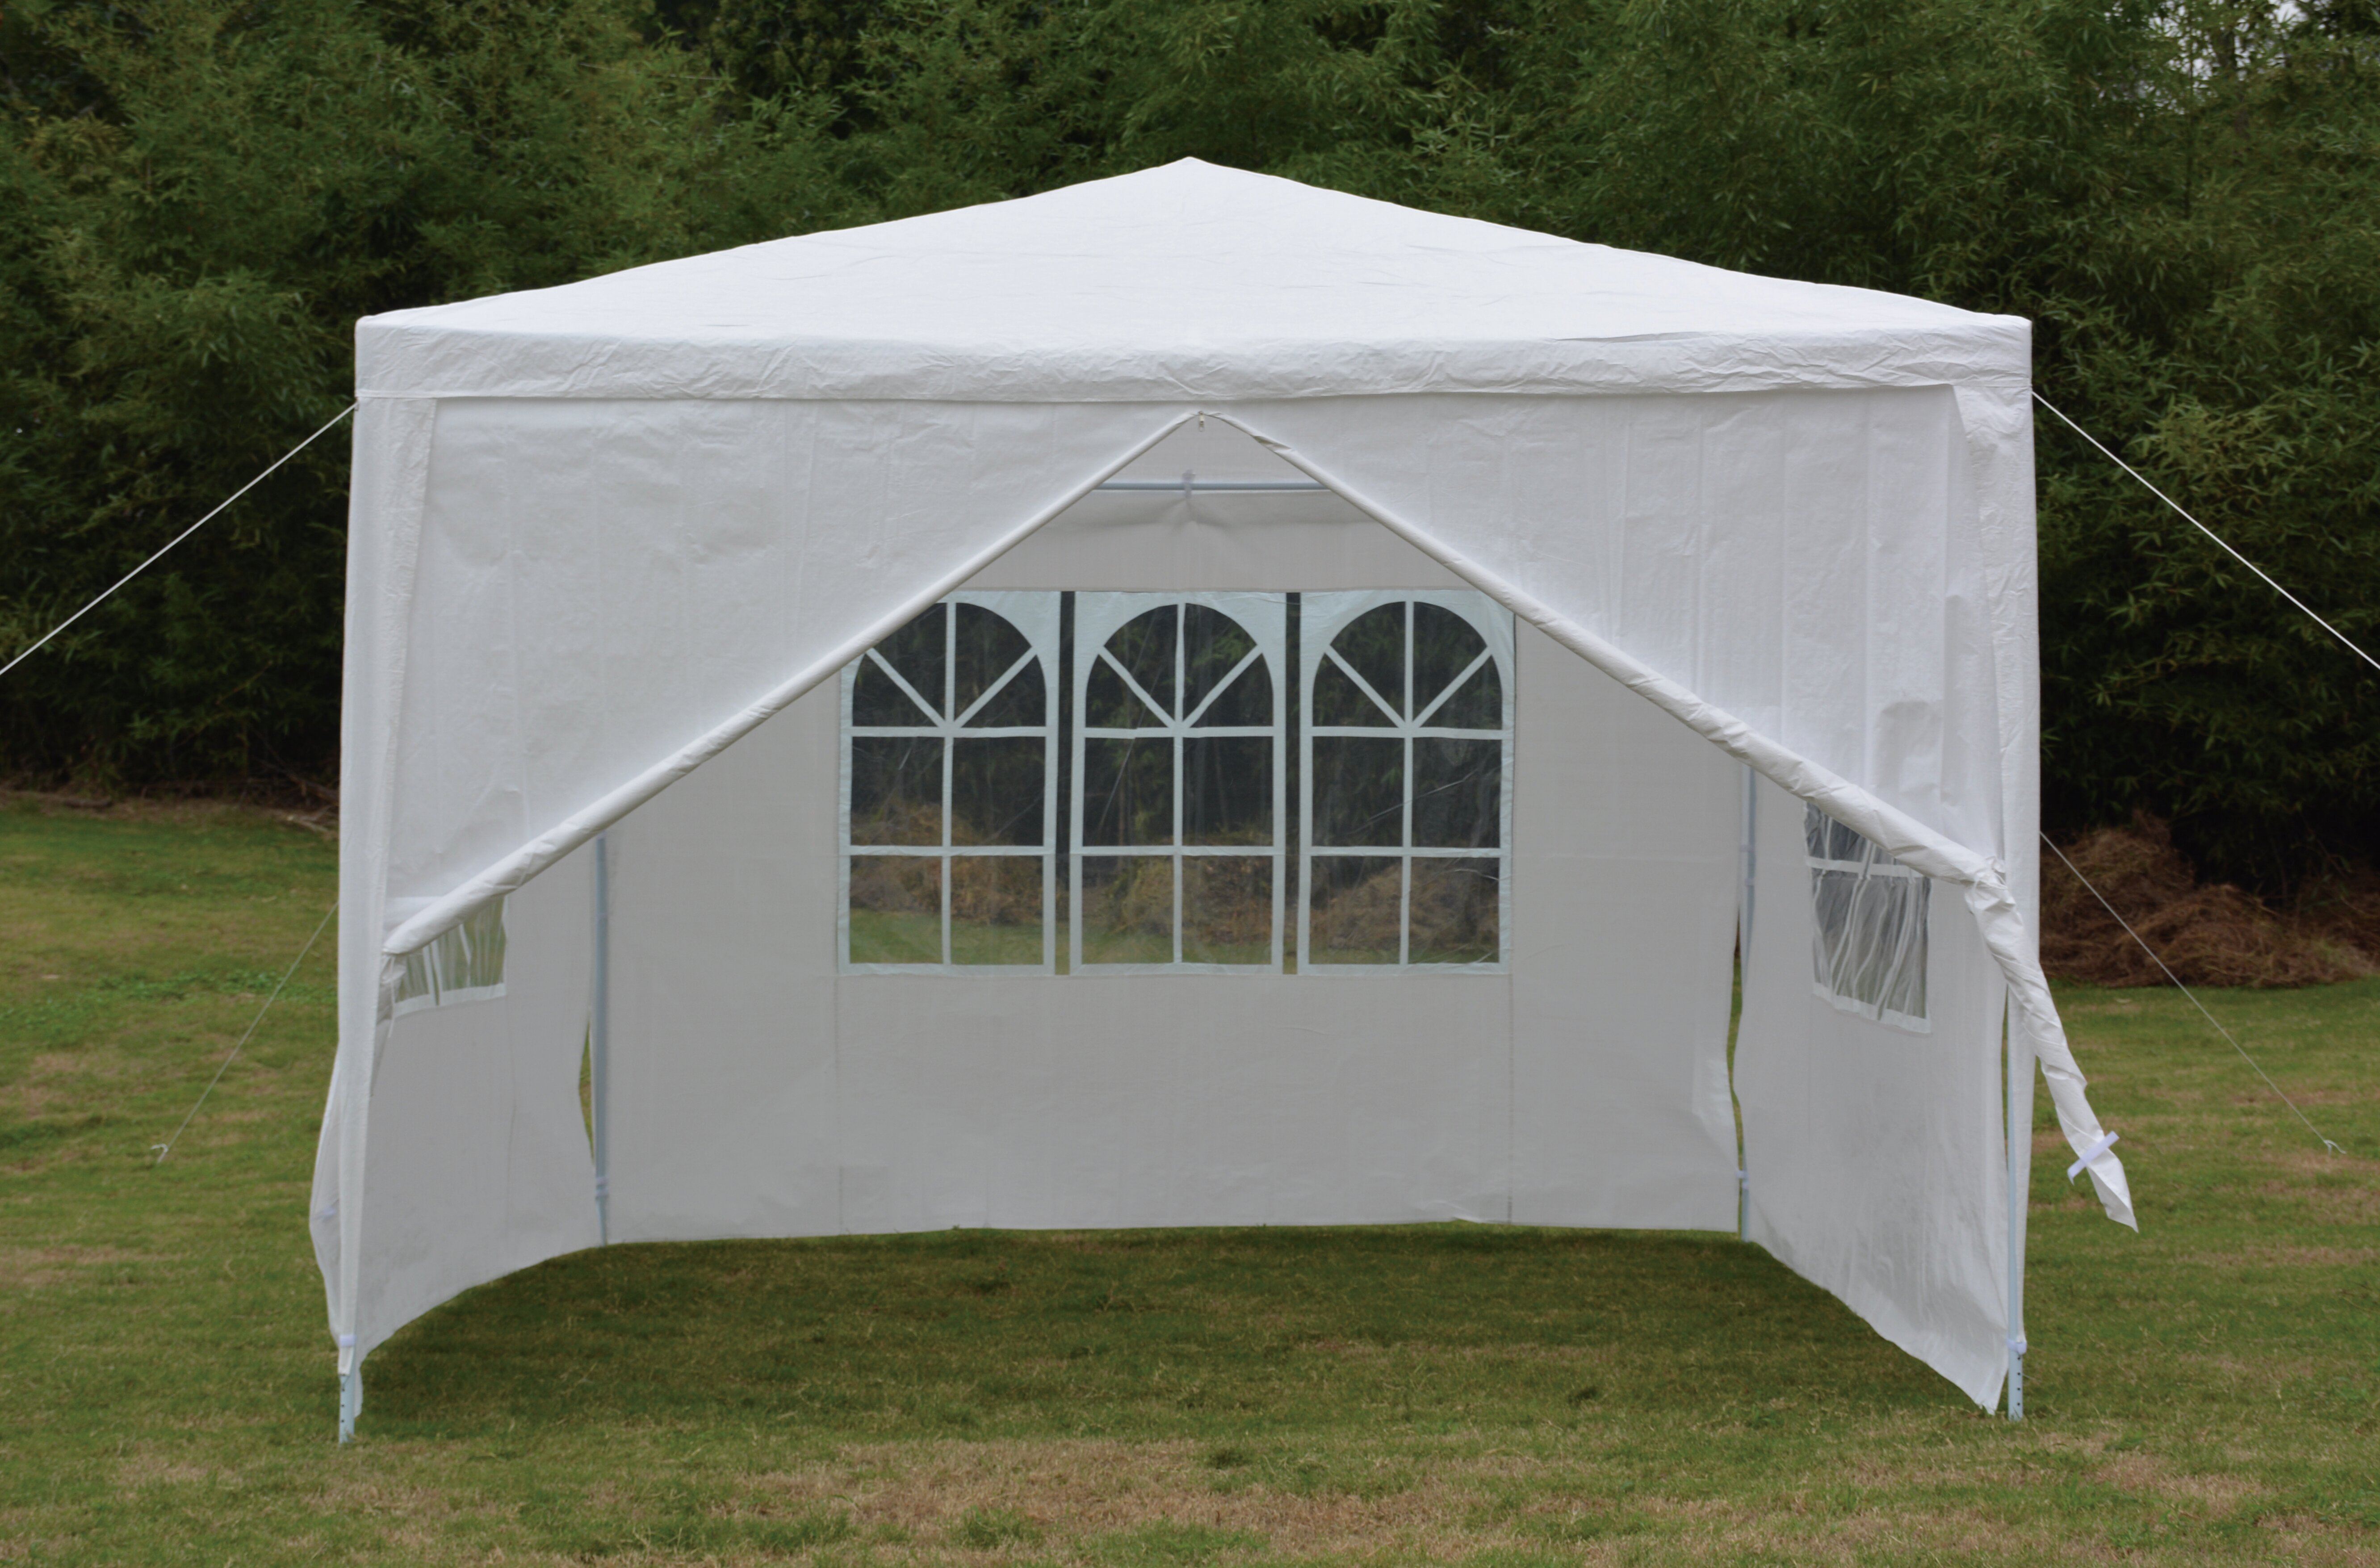 Backyard Expressions 10 Ft W X 10 Ft D Metal Party Tent Reviews